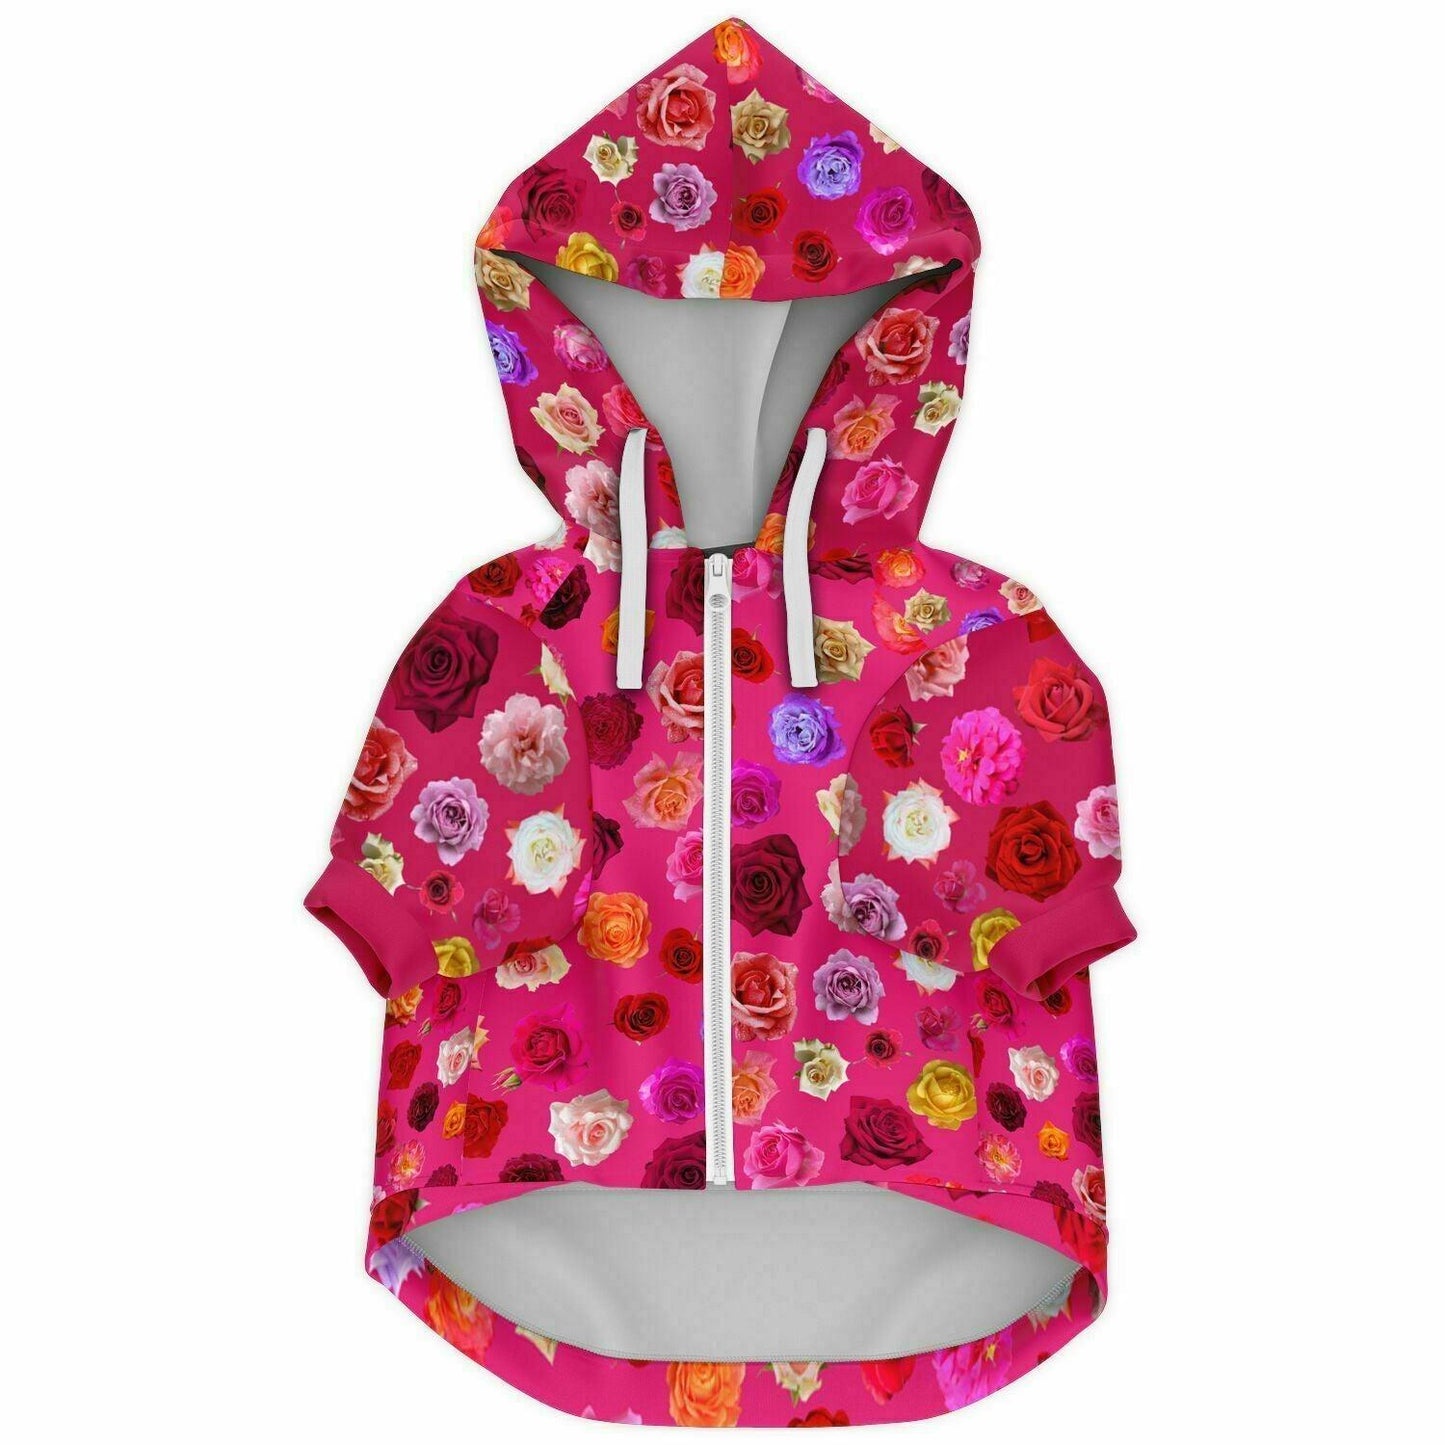 I love my Daddy pink Chihuahua girl hoodie jacket. Covered in roses of many shades. A handy velcro pouch pocket on the back features a chihuahua surrounded by a love heart of roses and the words "I love my Daddy". The chest zips open and the hoodie even comes with an on-trend flat drawstring. So cute! The inside is brushed fleece to keep your chi cosy on walkies, or on cold winter nights cuddling on the sofa. Design by Renate Kriegler for Chimigos.